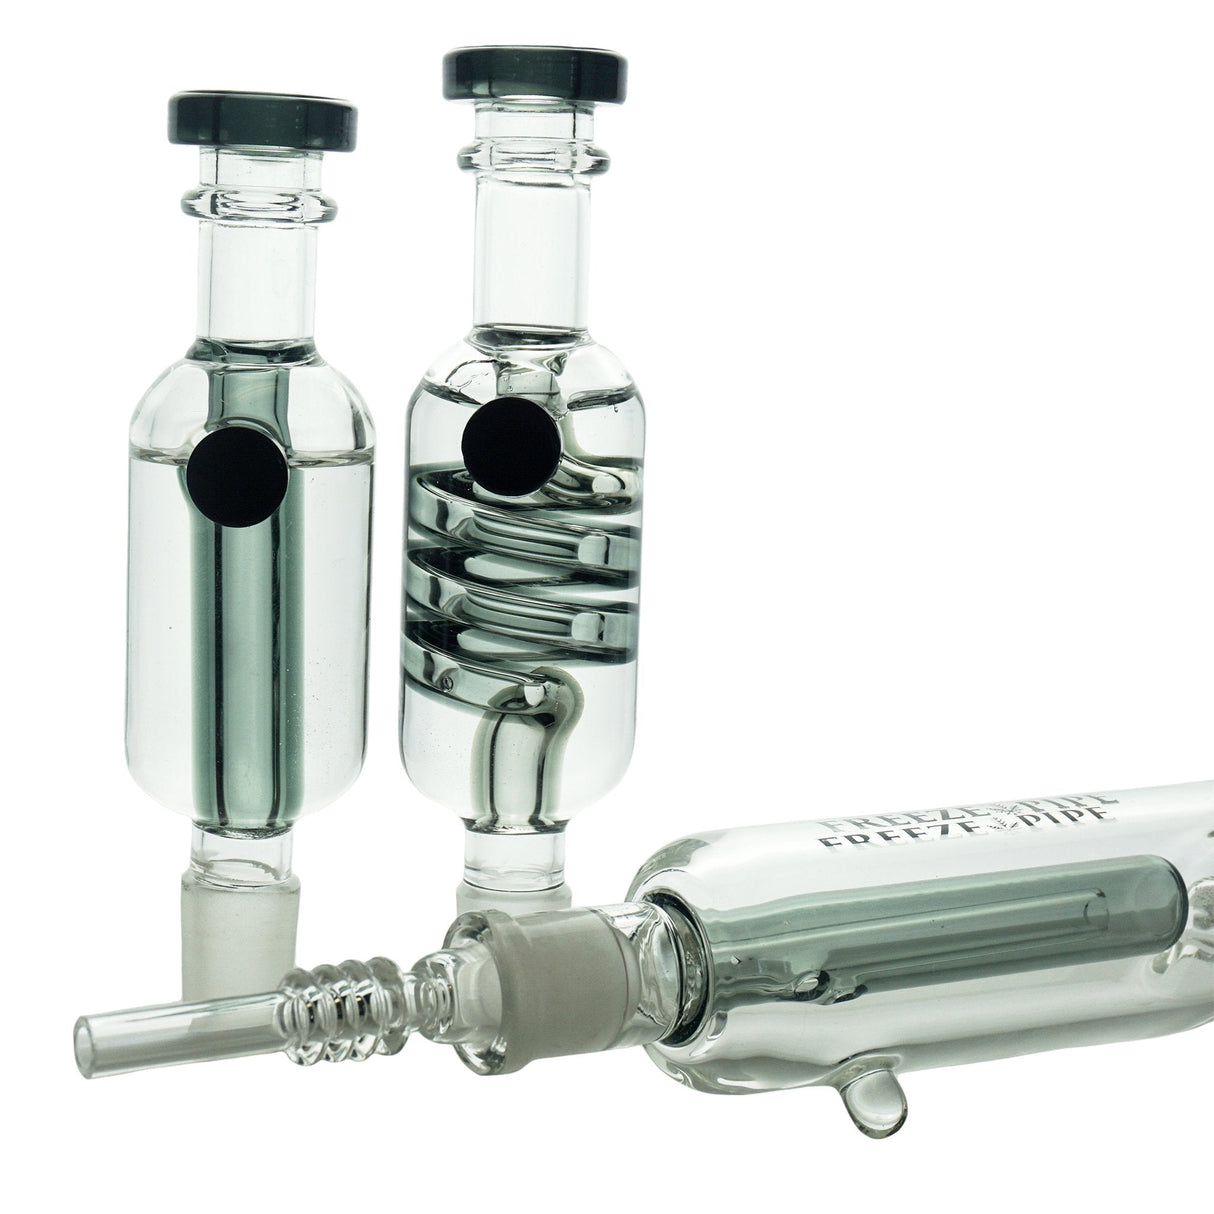 Freeze Pipe Nectar Collector Kit with metal coils, angled side view on white background